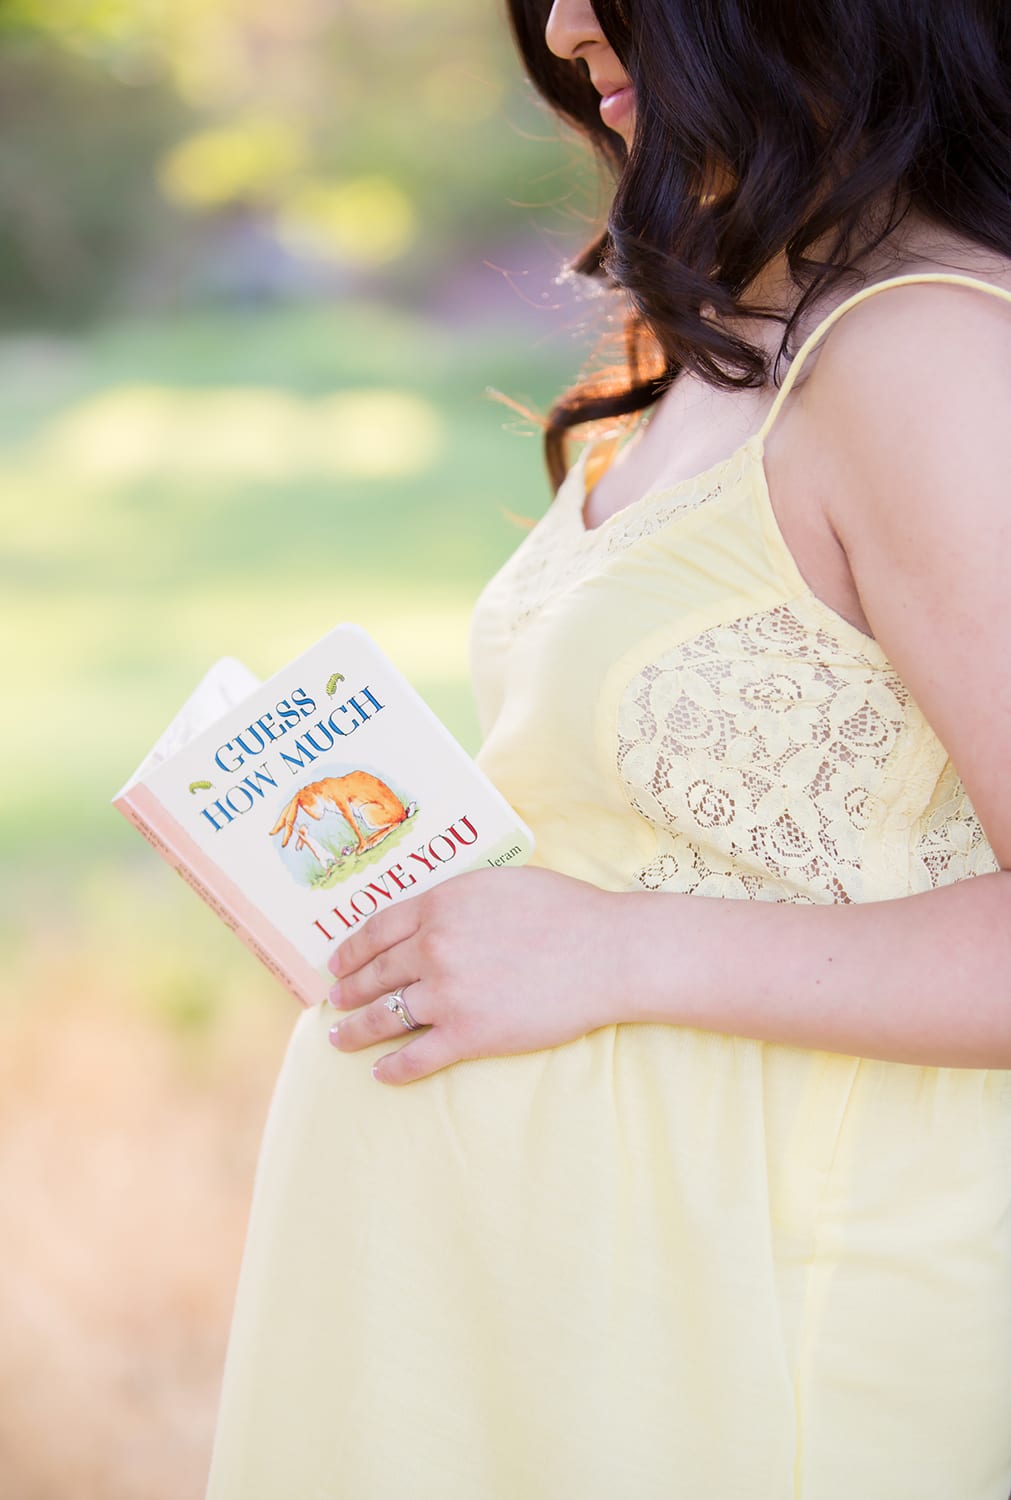 Portland_Maternity_Photographer_Gretchen_Barros_Photography_Maternity_Guess_How_Much_I_Love_You